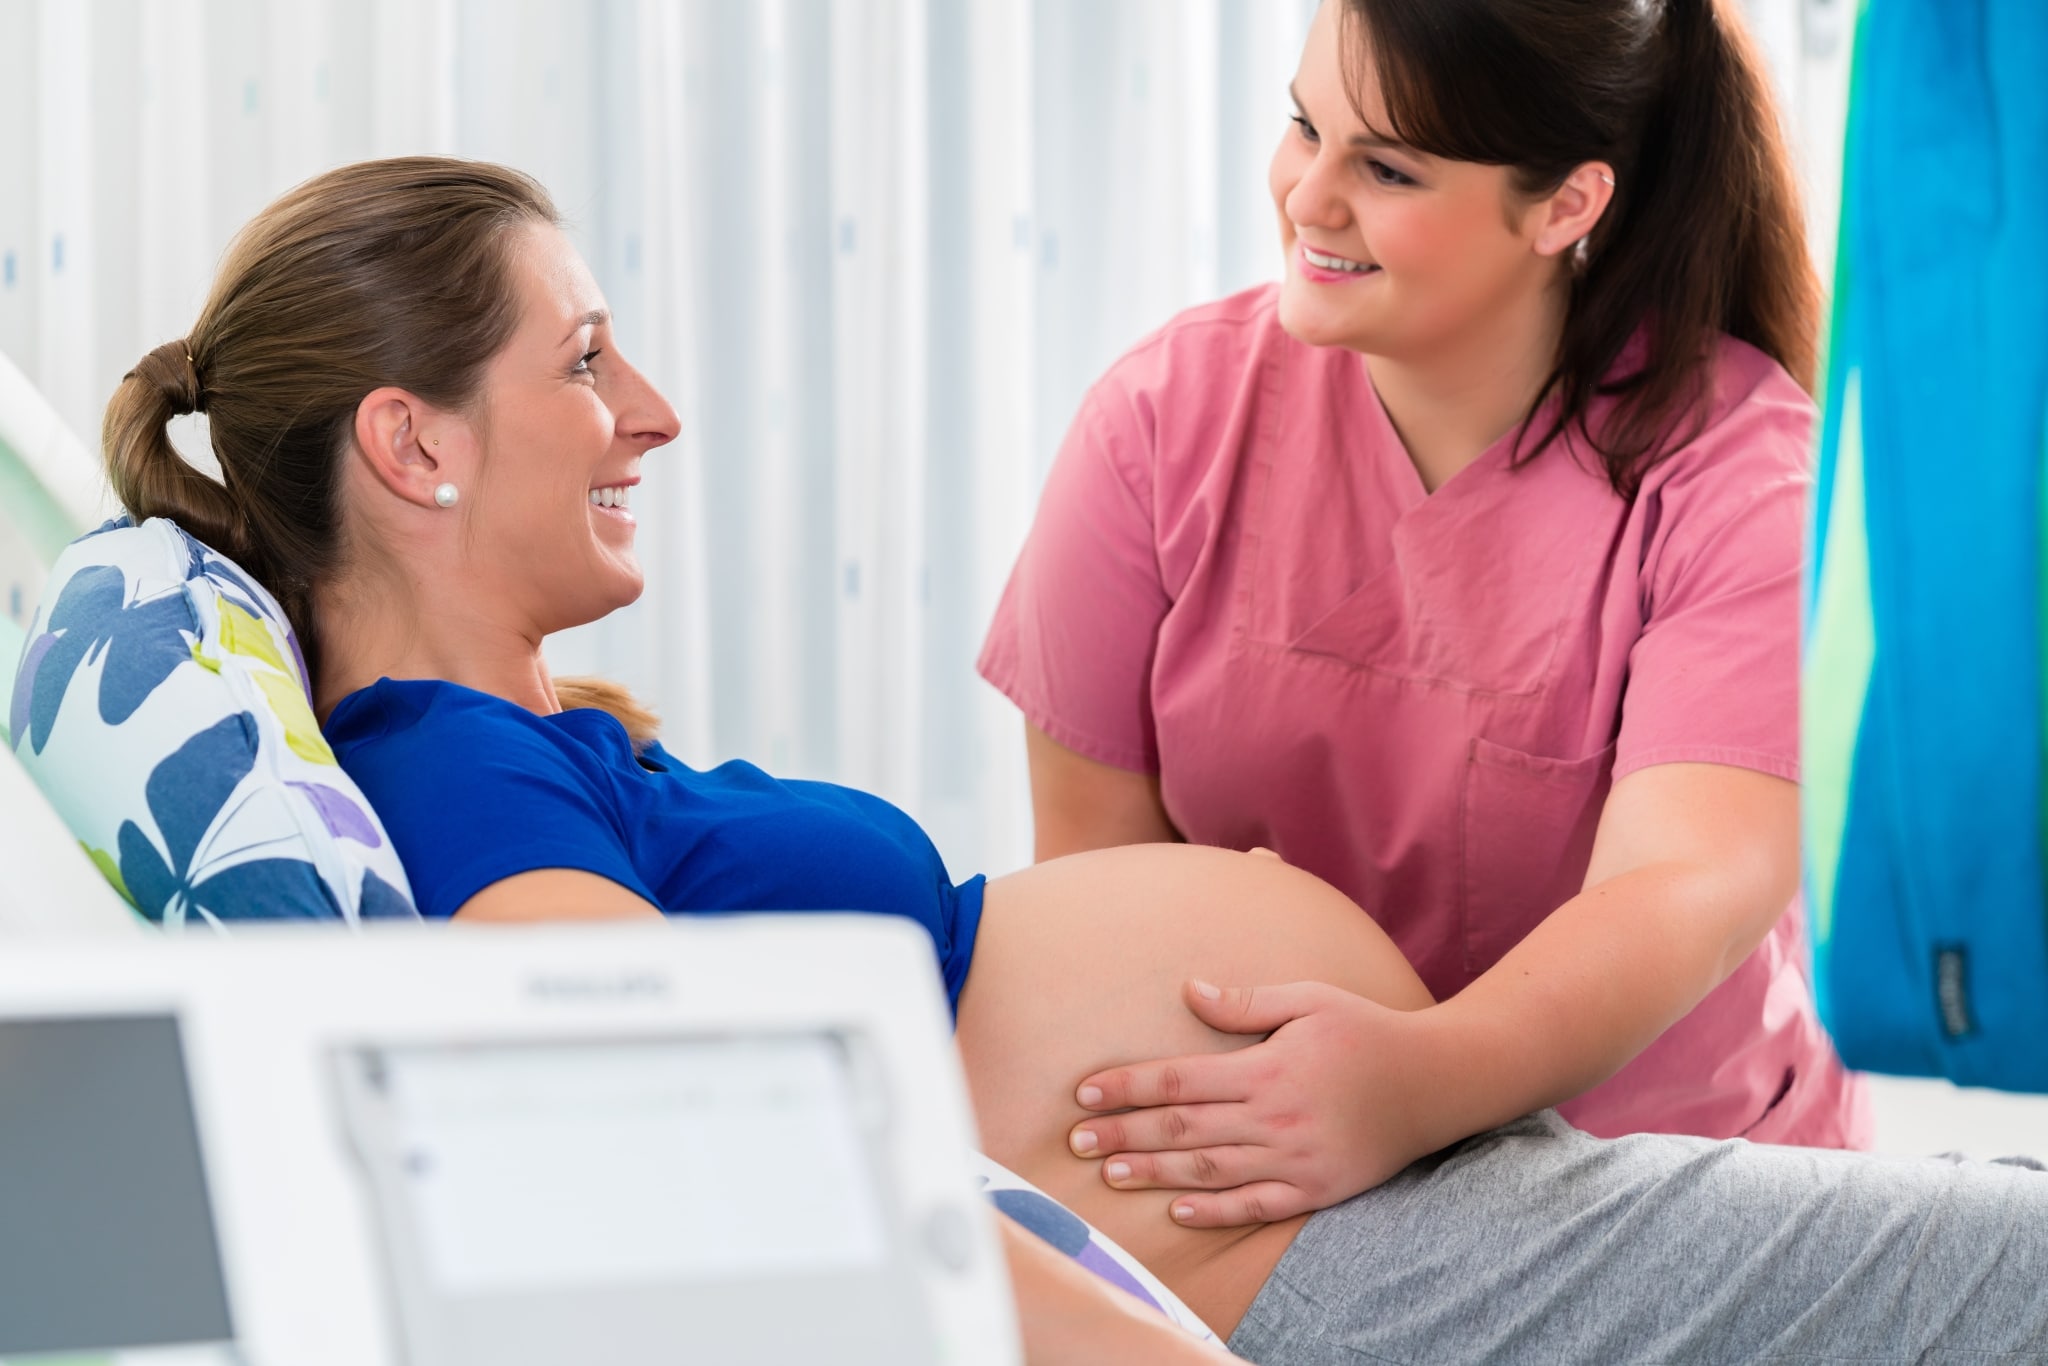 Pregnant woman in a delivery room